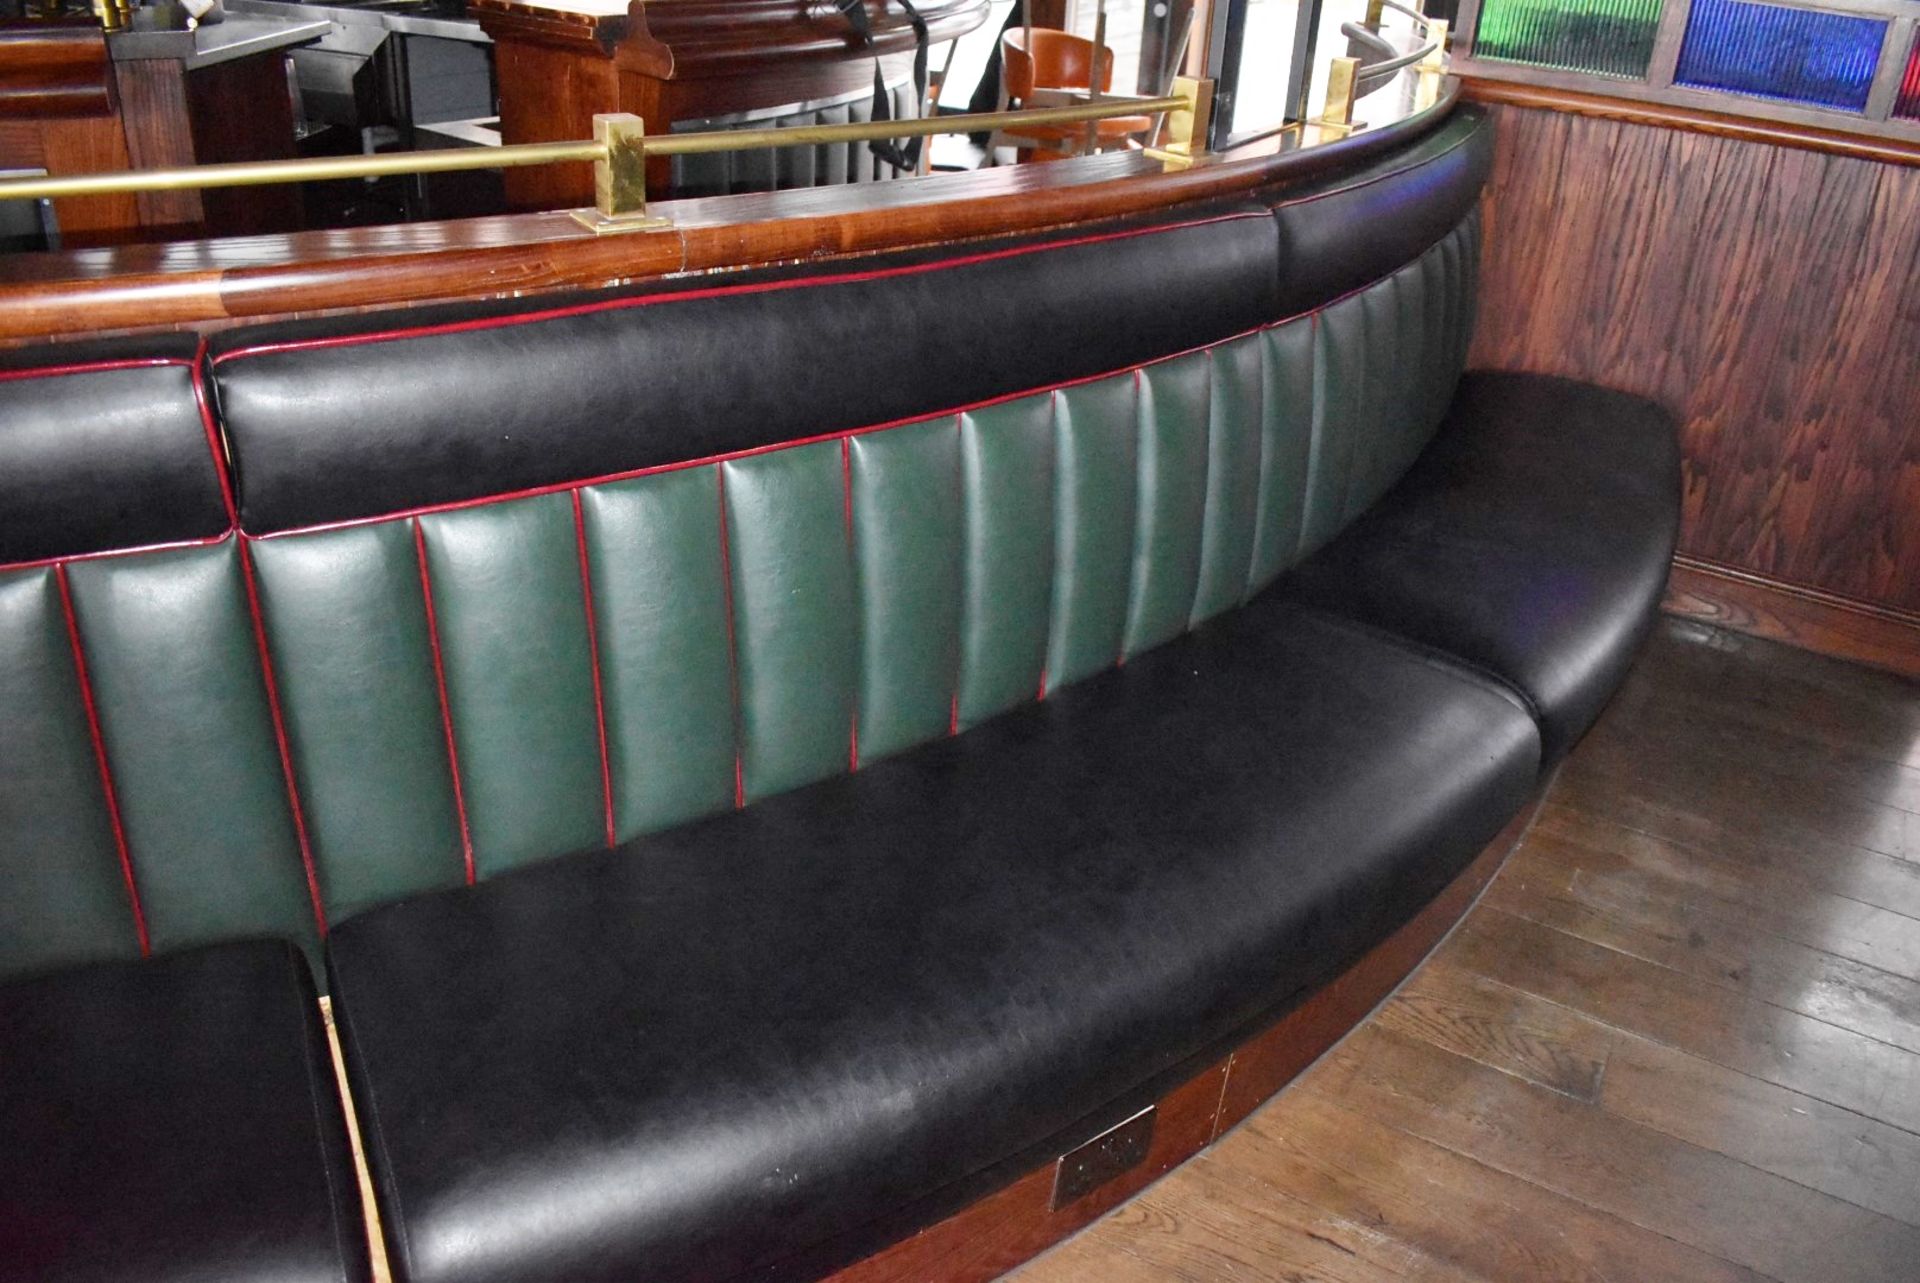 1 x Banqueting Seating Bench - 15ft in Length - Green & Black Upholstery With Vertical Fluted Back - Image 5 of 11